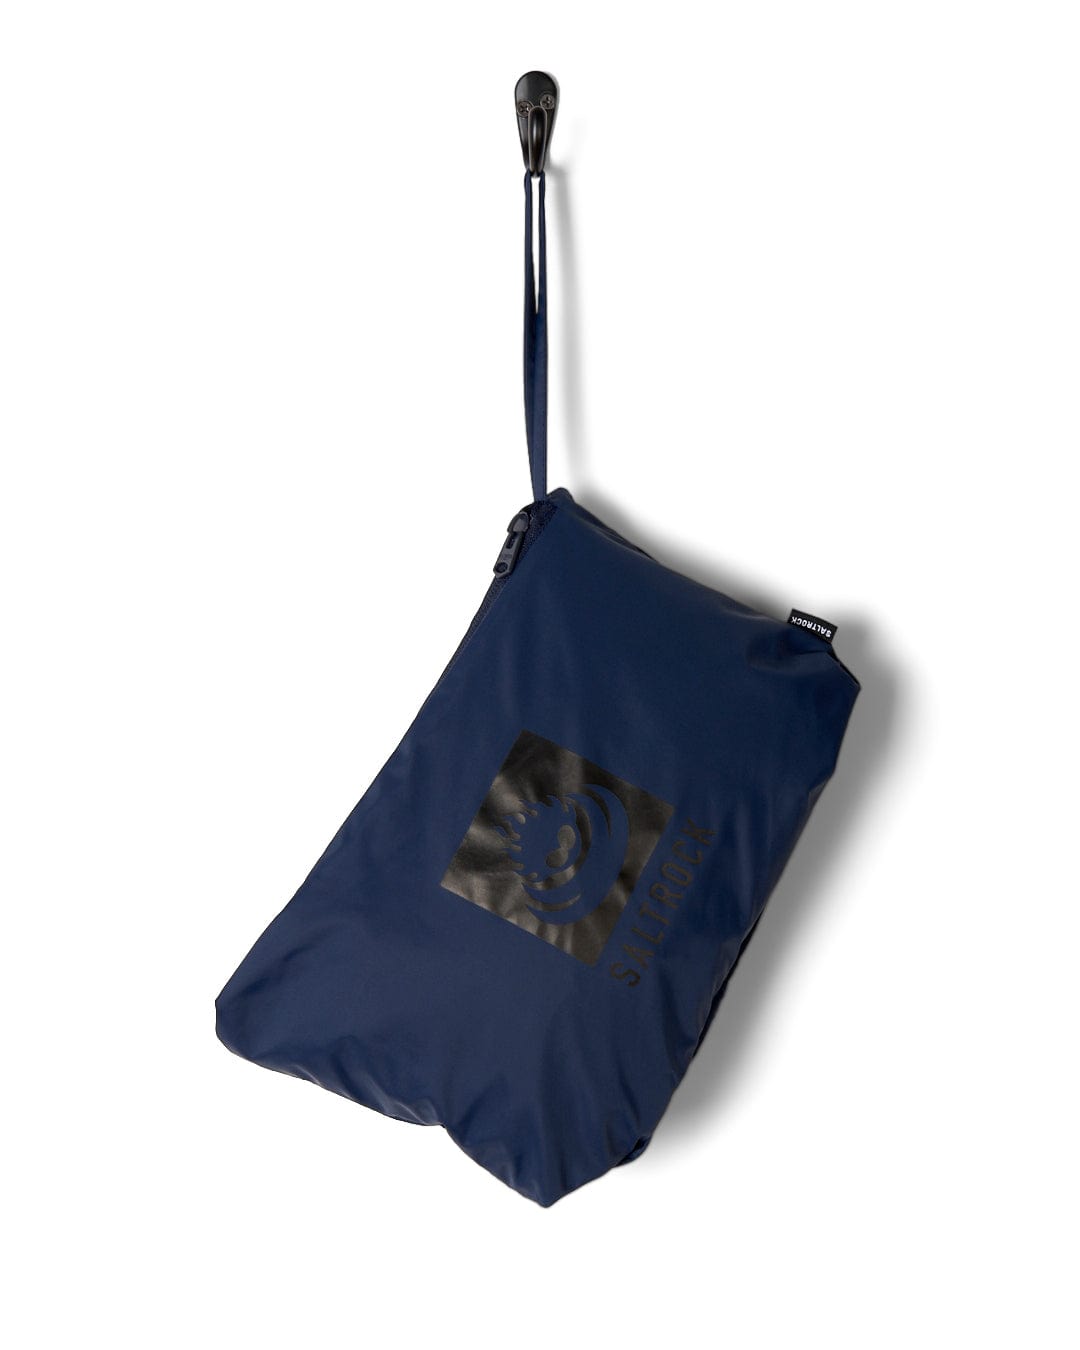 A navy blue foldable tote bag with a glossy black logo, suspended by its black strap against a white background, crafted from 190T nylon.